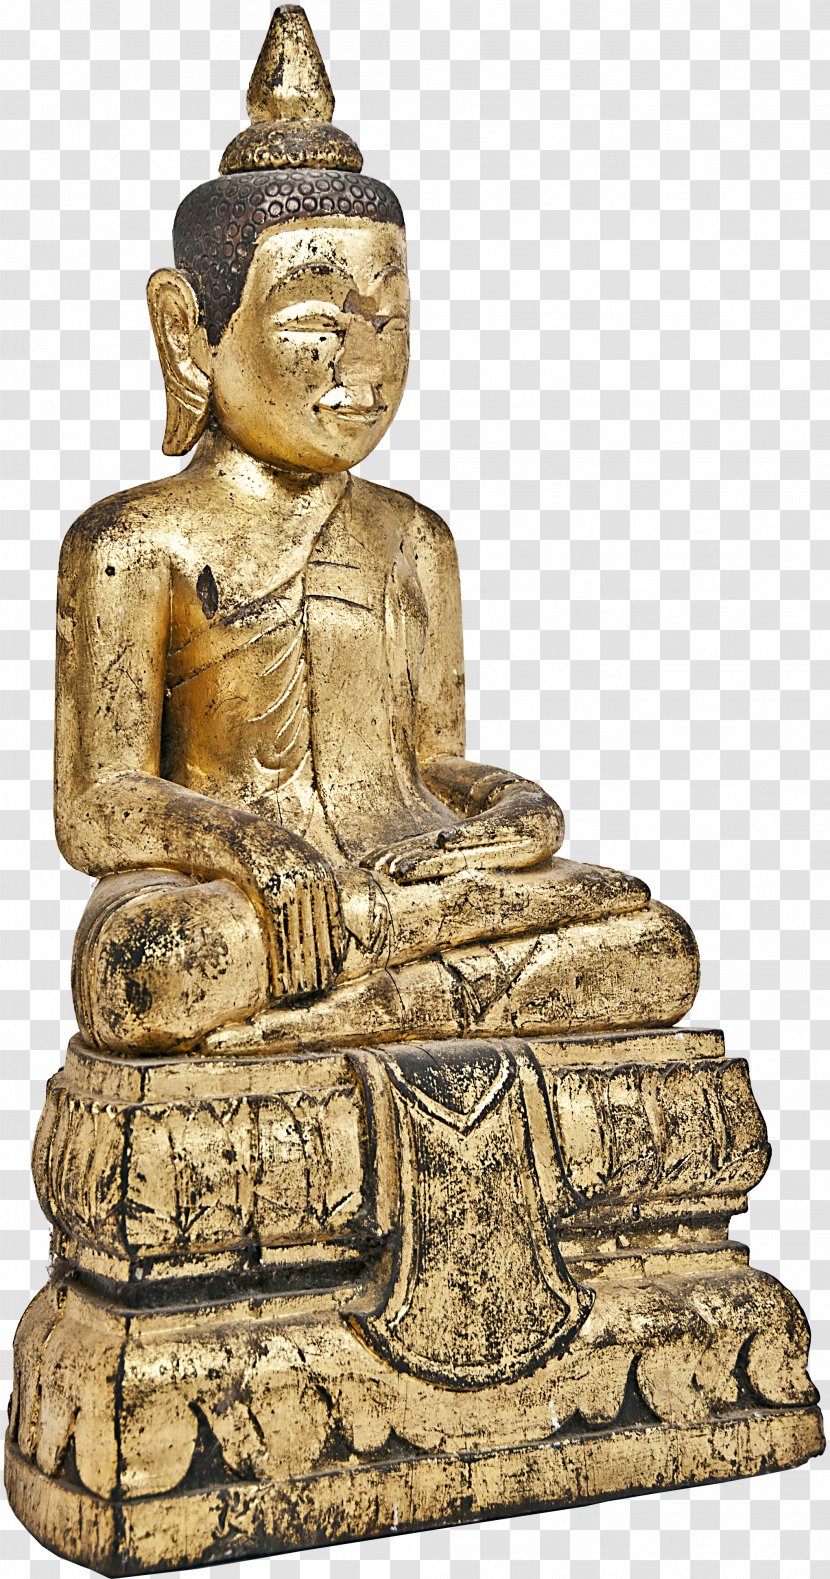 Archaeological Site Statue Artifact 01504 Bronze - Figurine - Ancient History Transparent PNG